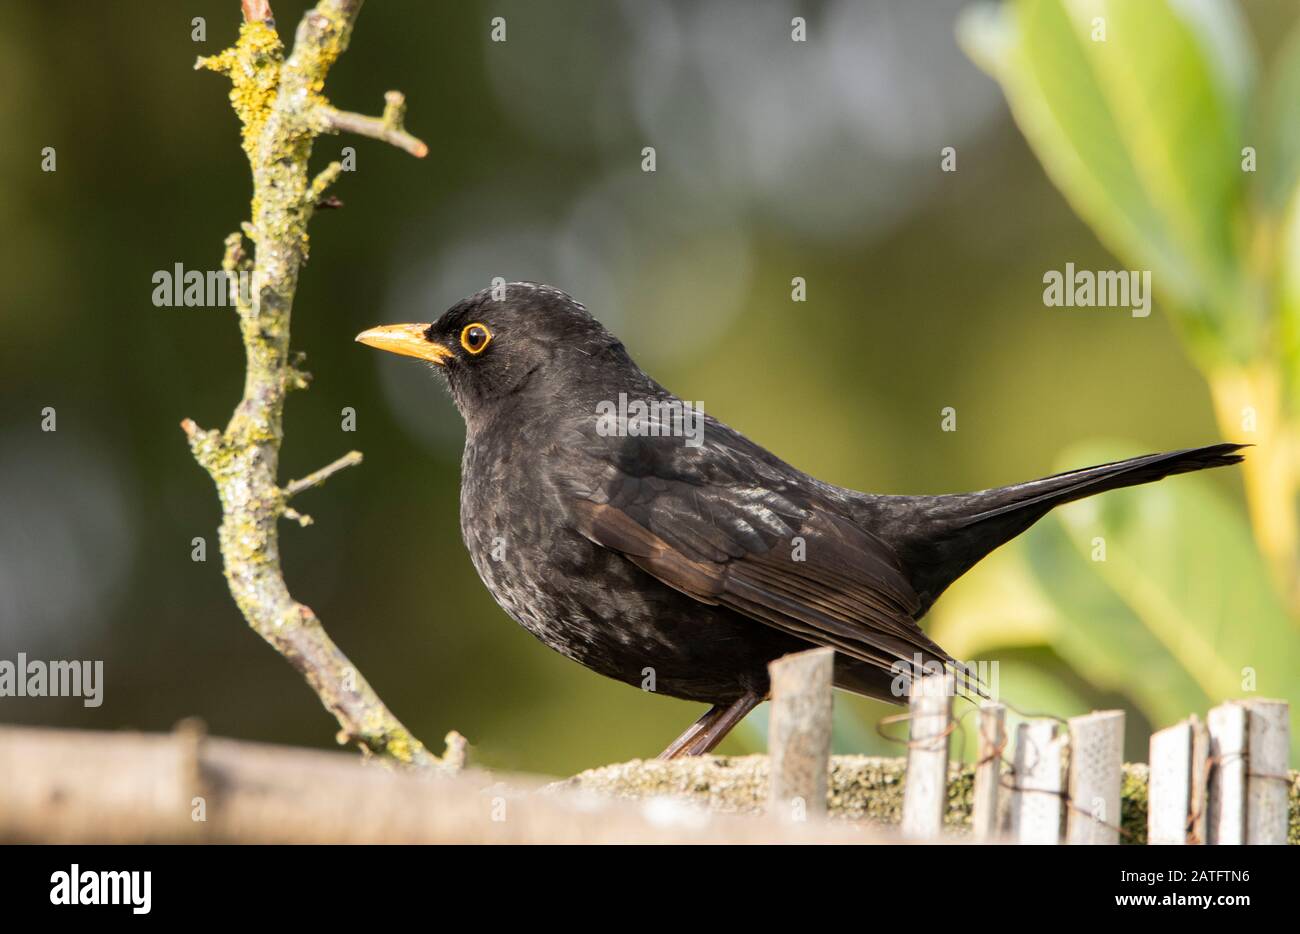 Male Blackbird, Turdus merula, perched on a fence in the sunshine in a British Garden Stock Photo